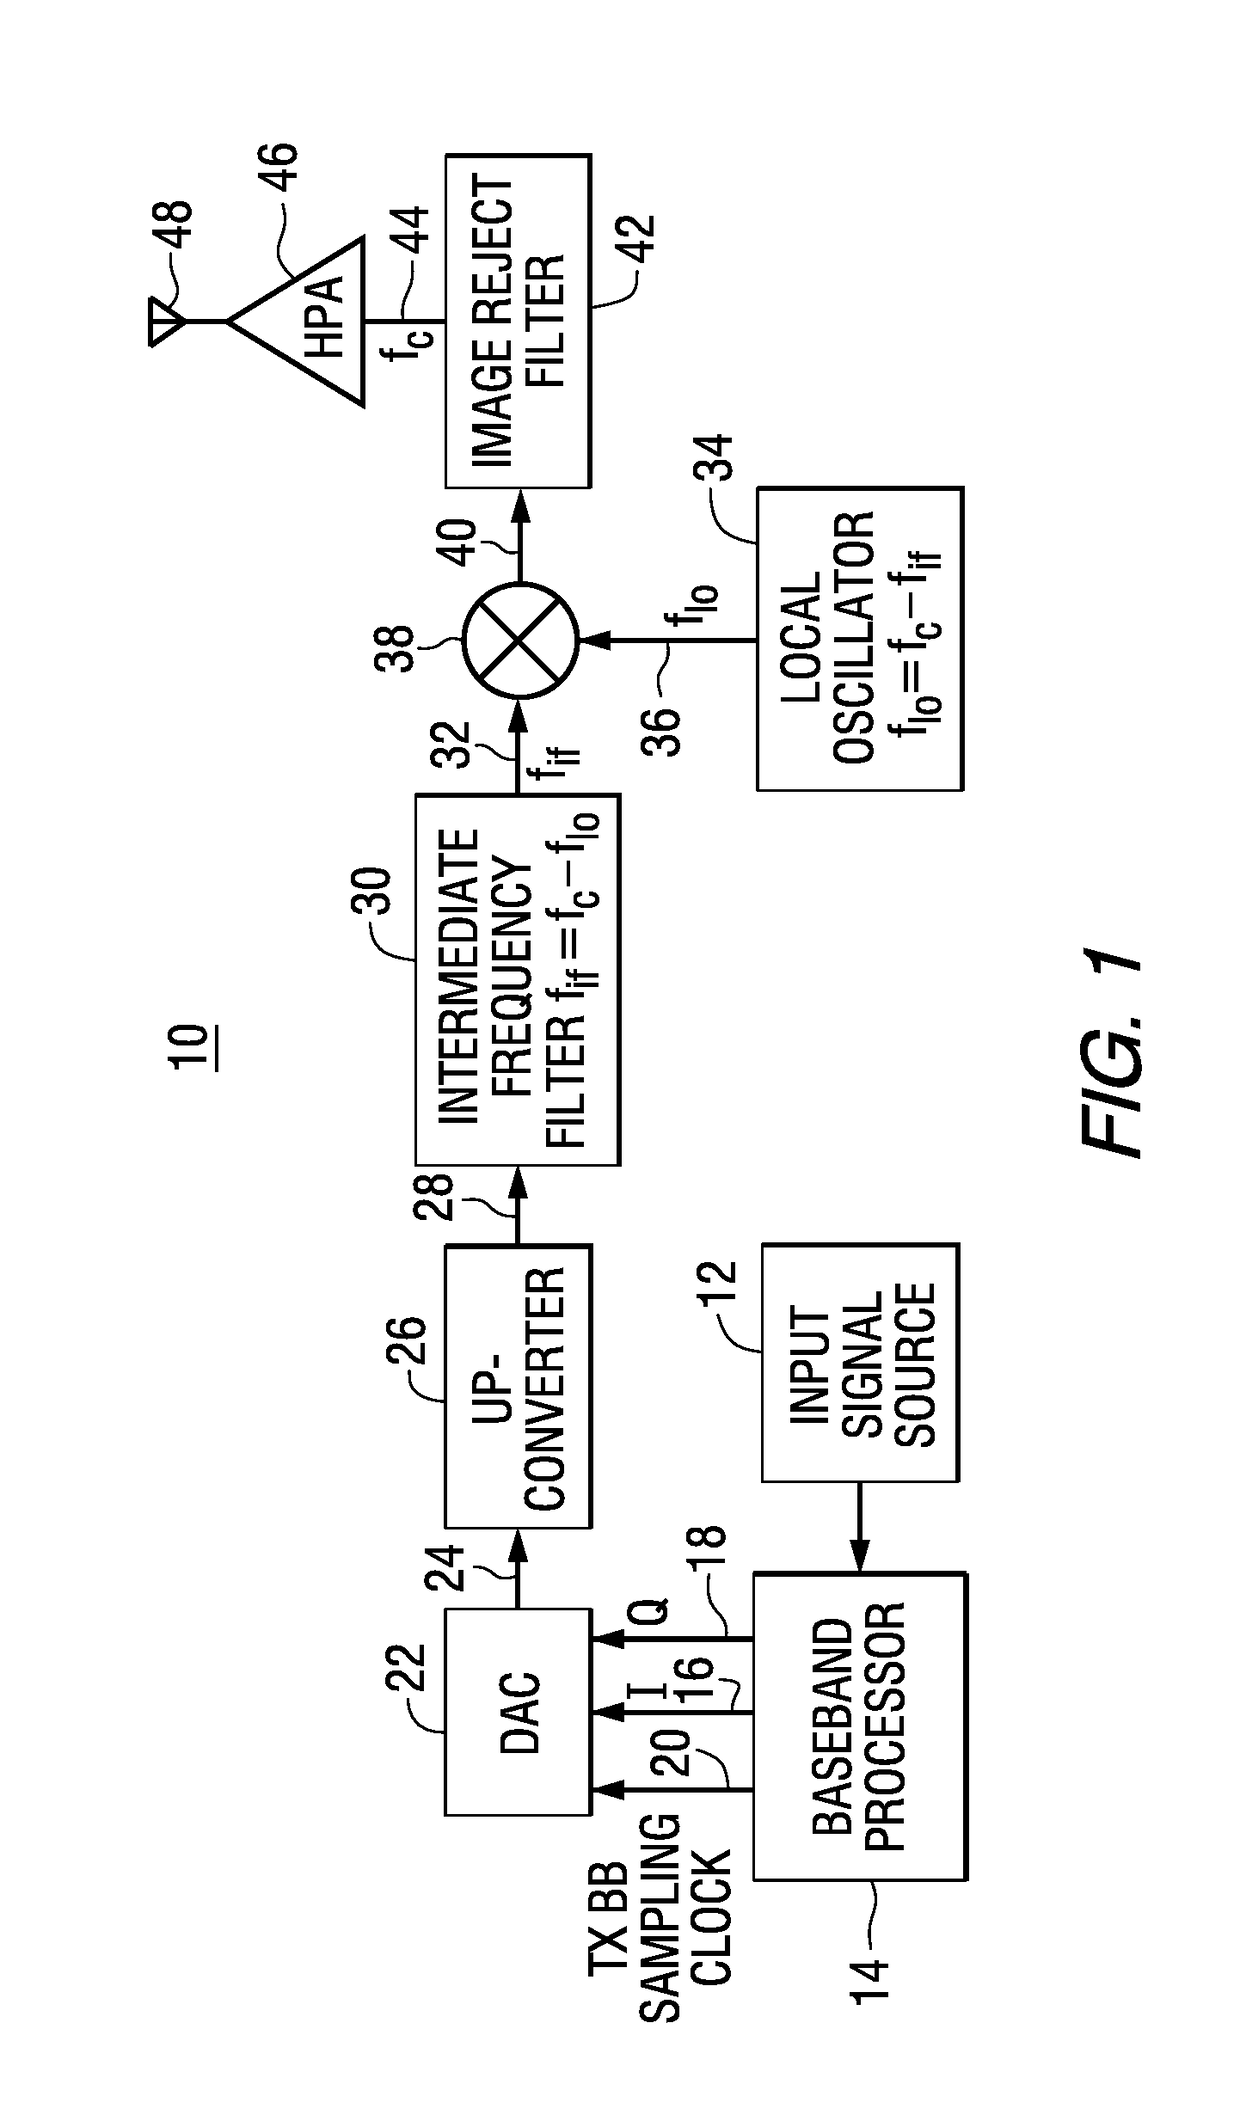 Method and apparatus for level control in blending an audio signal in an in-band on-channel radio system